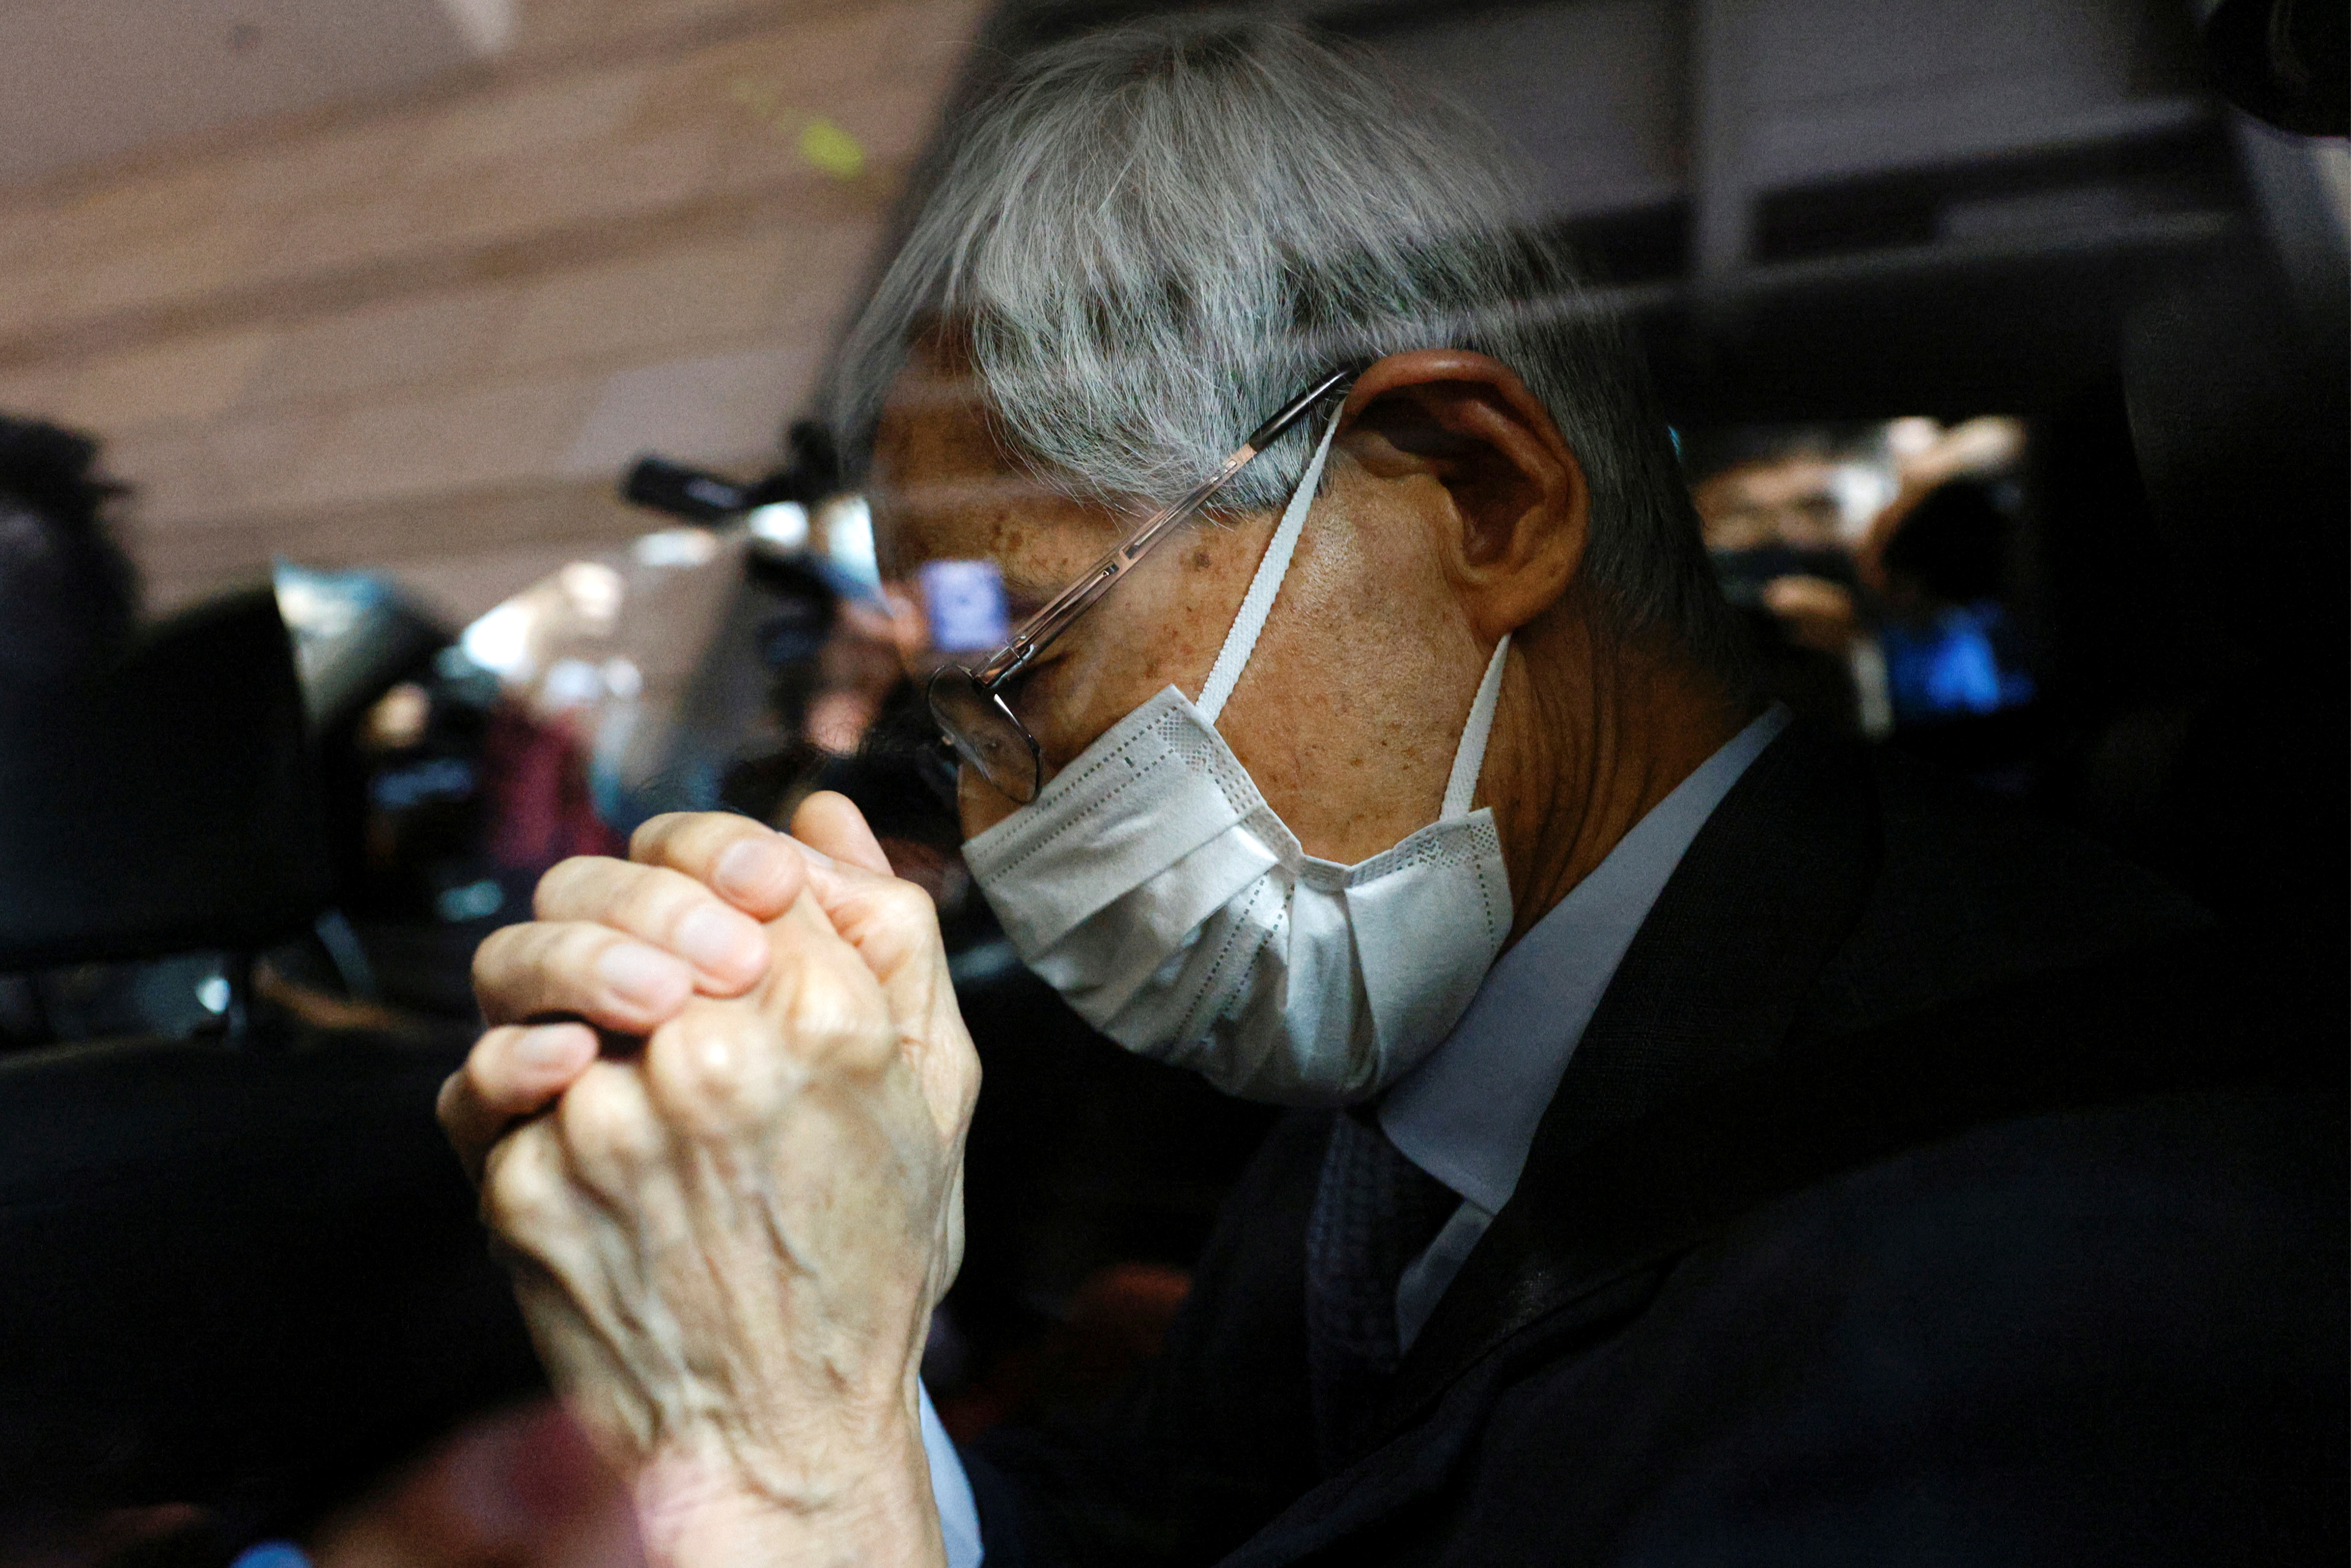 Democratic Party founder and barrister Martin Lee leaves the West Kowloon Courts after getting his suspended sentence on unauthorised assembly, in Hong Kong